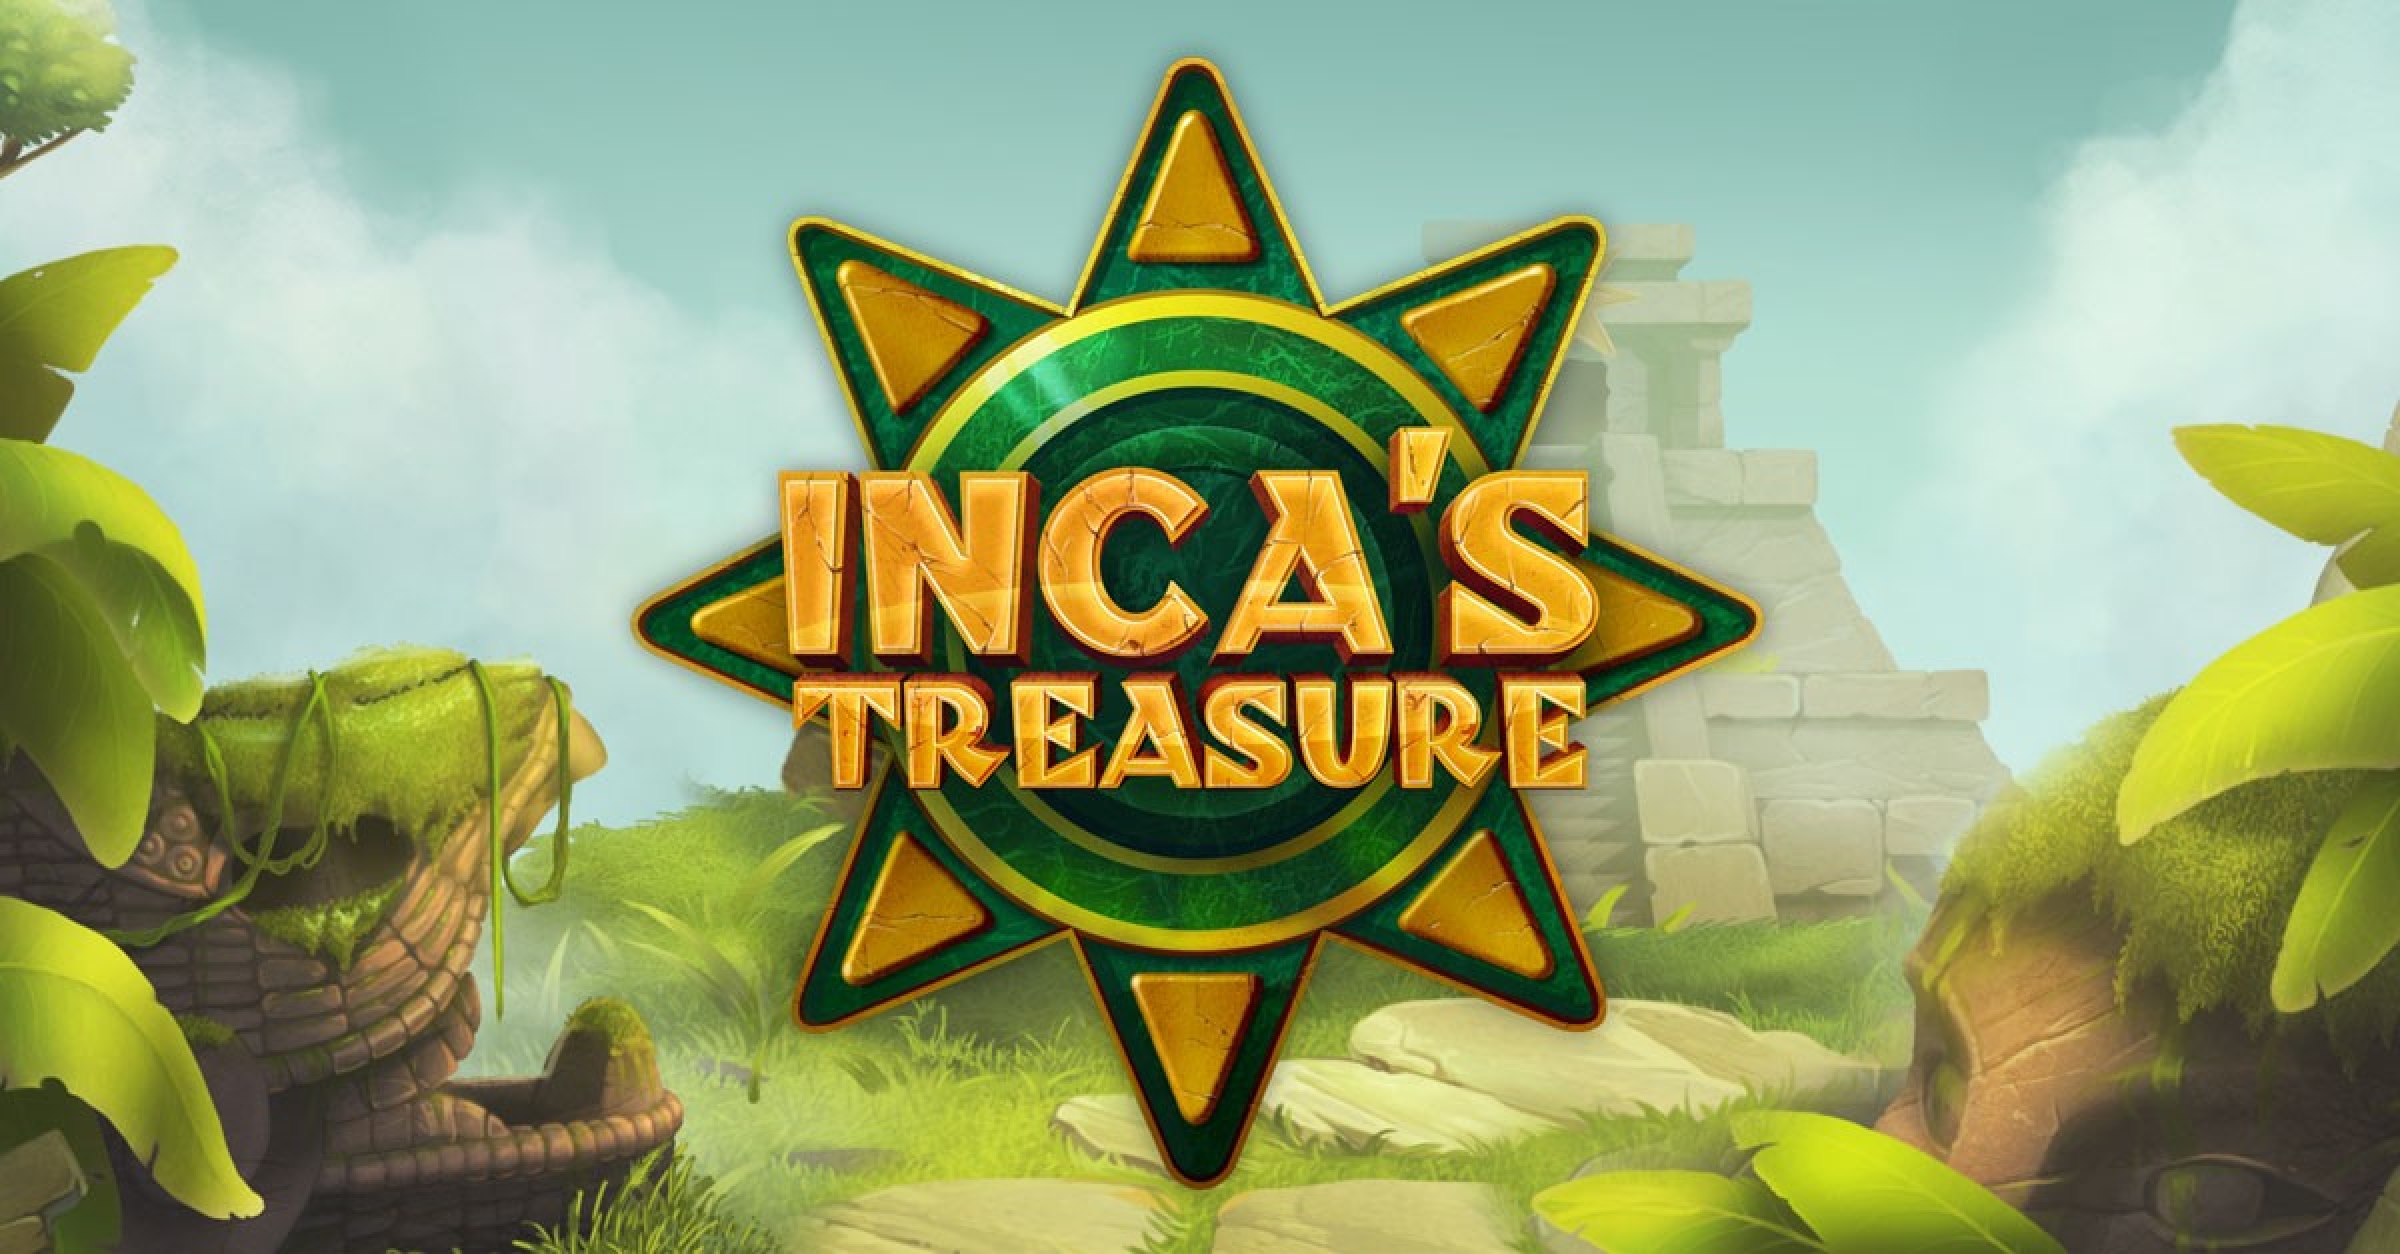 The Inca's Treasure Online Slot Demo Game by Tom Horn Gaming